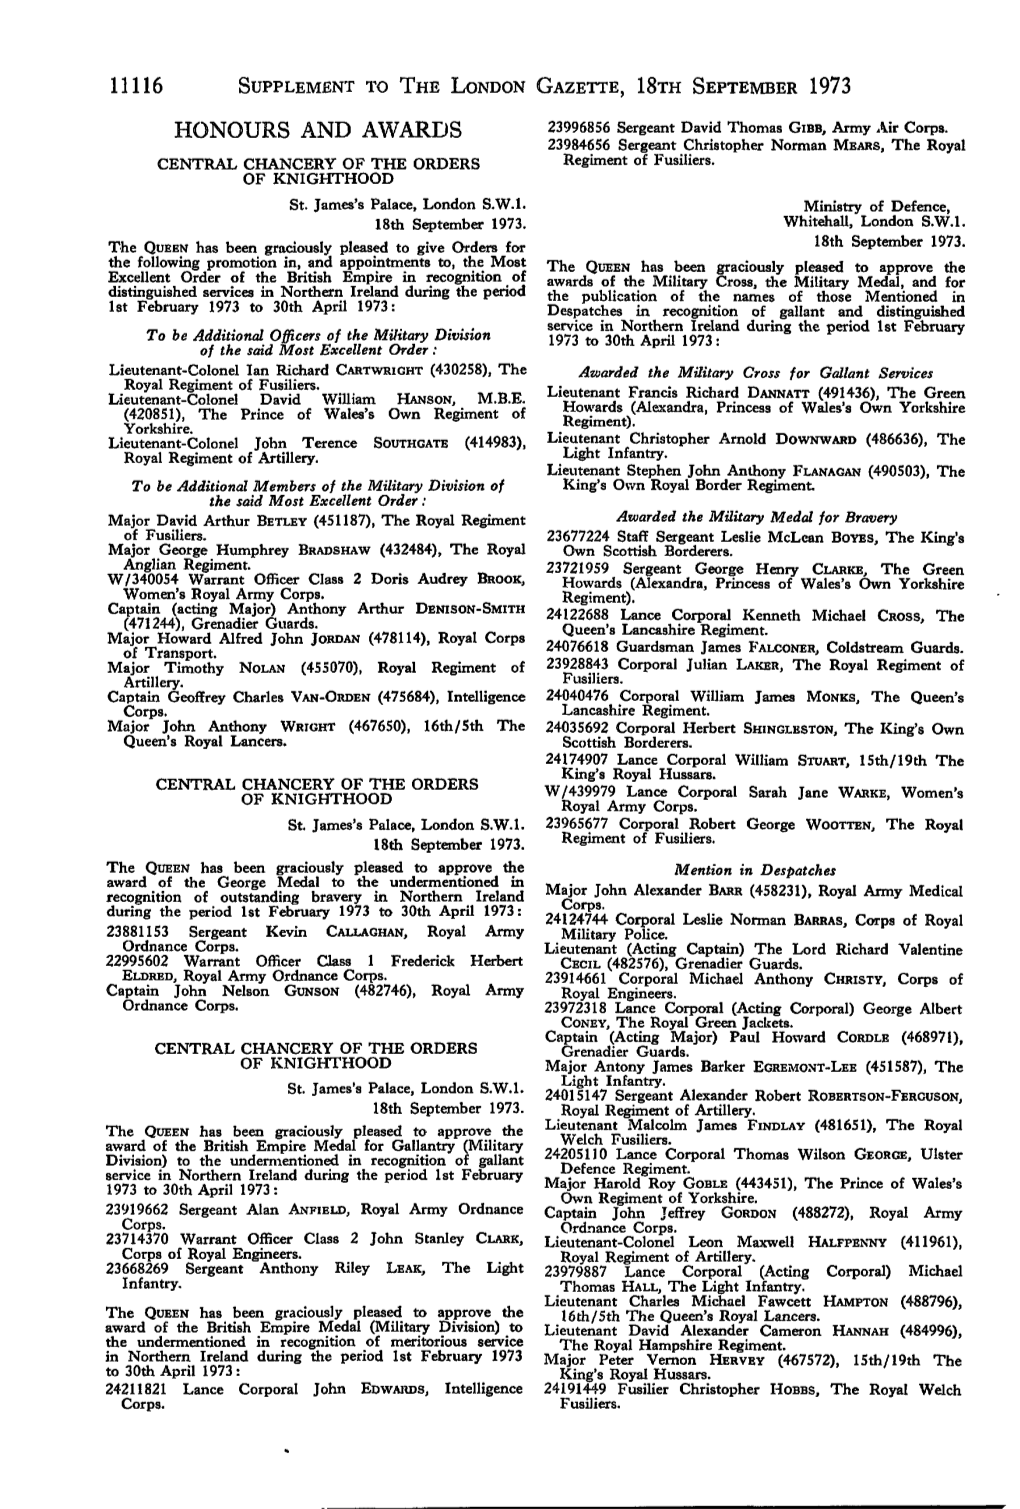 11116 SUPPLEMENT to the LONDON GAZETTE, 18TH SEPTEMBER 1973 HONOURS and AWARDS 23996856 Sergeant David Thomas GIBB, Army Air Corps